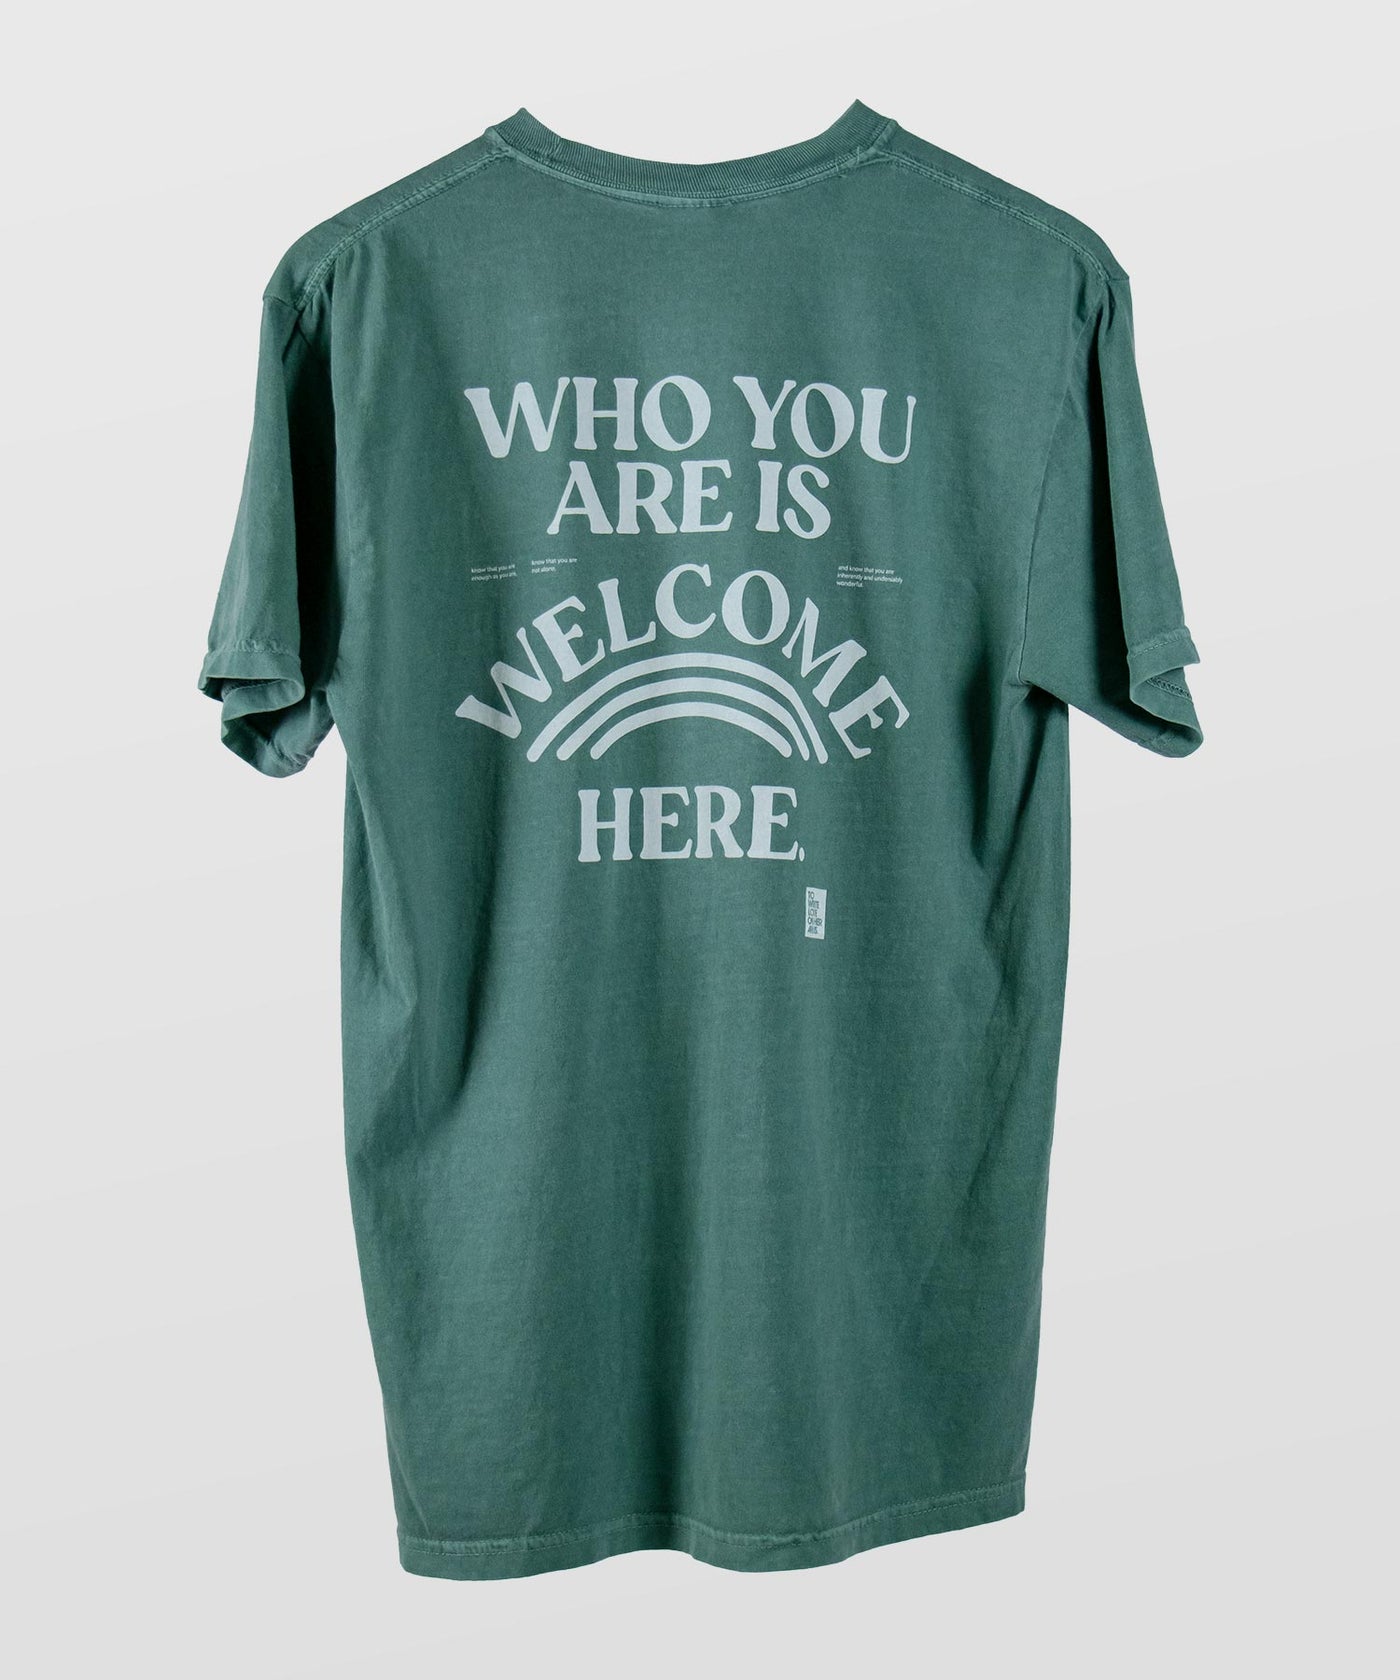 Who You Are Shirt